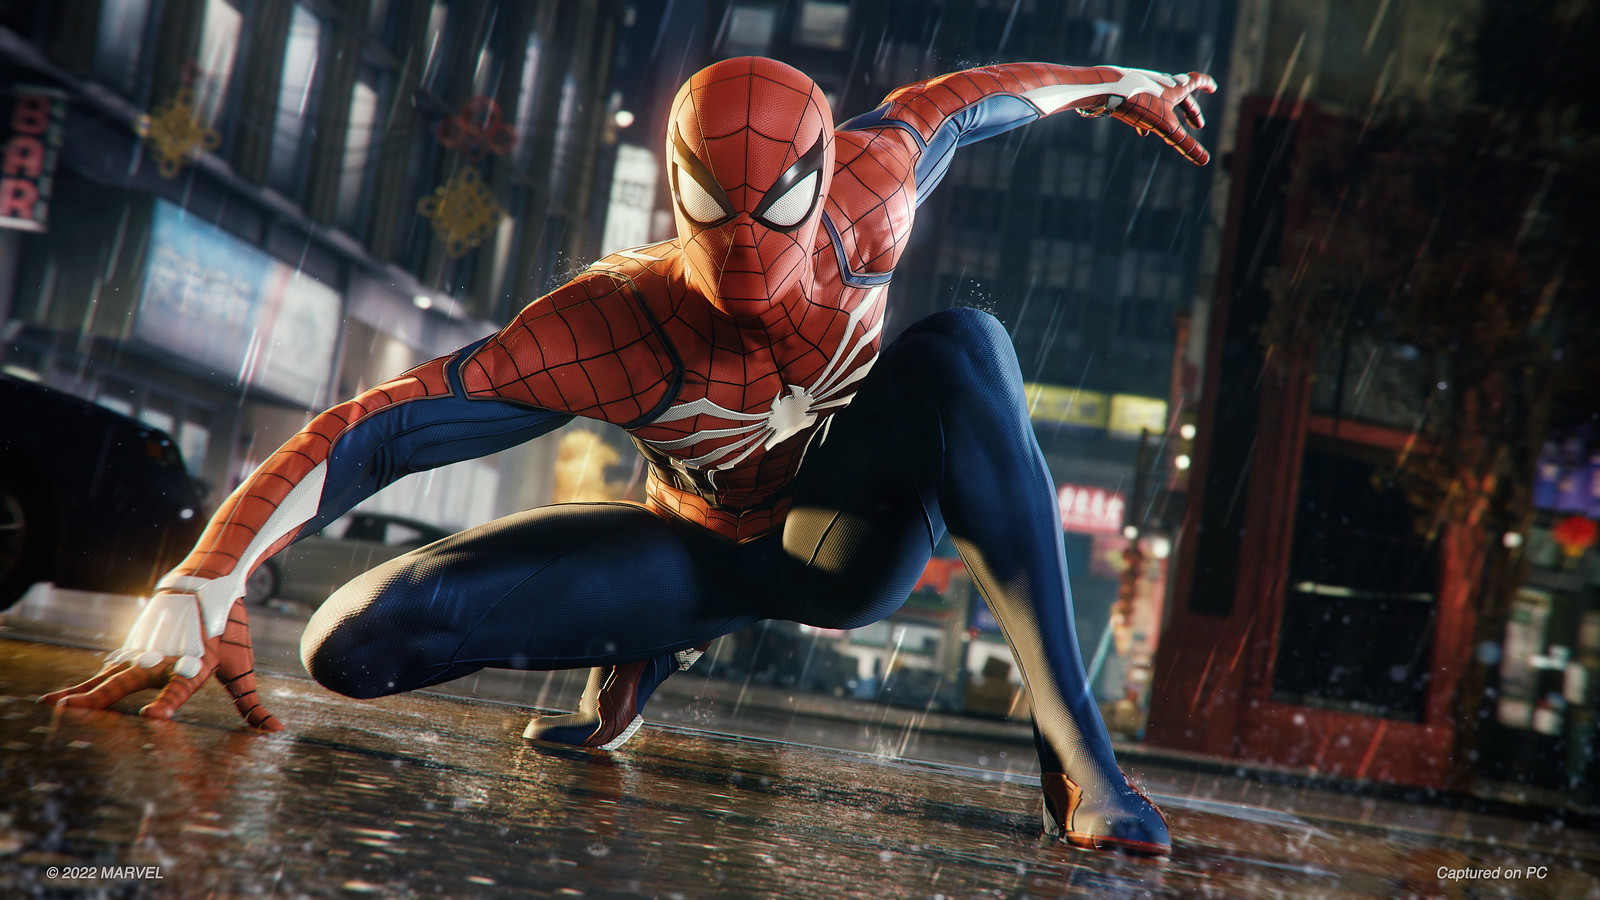 Marvel's Spider-Man PC system requirements unveiled: Intel Core i5-4160 and Nvidia GeForce GTX 950 sufficient for a 720p 30 FPS experience - NotebookCheck.net News